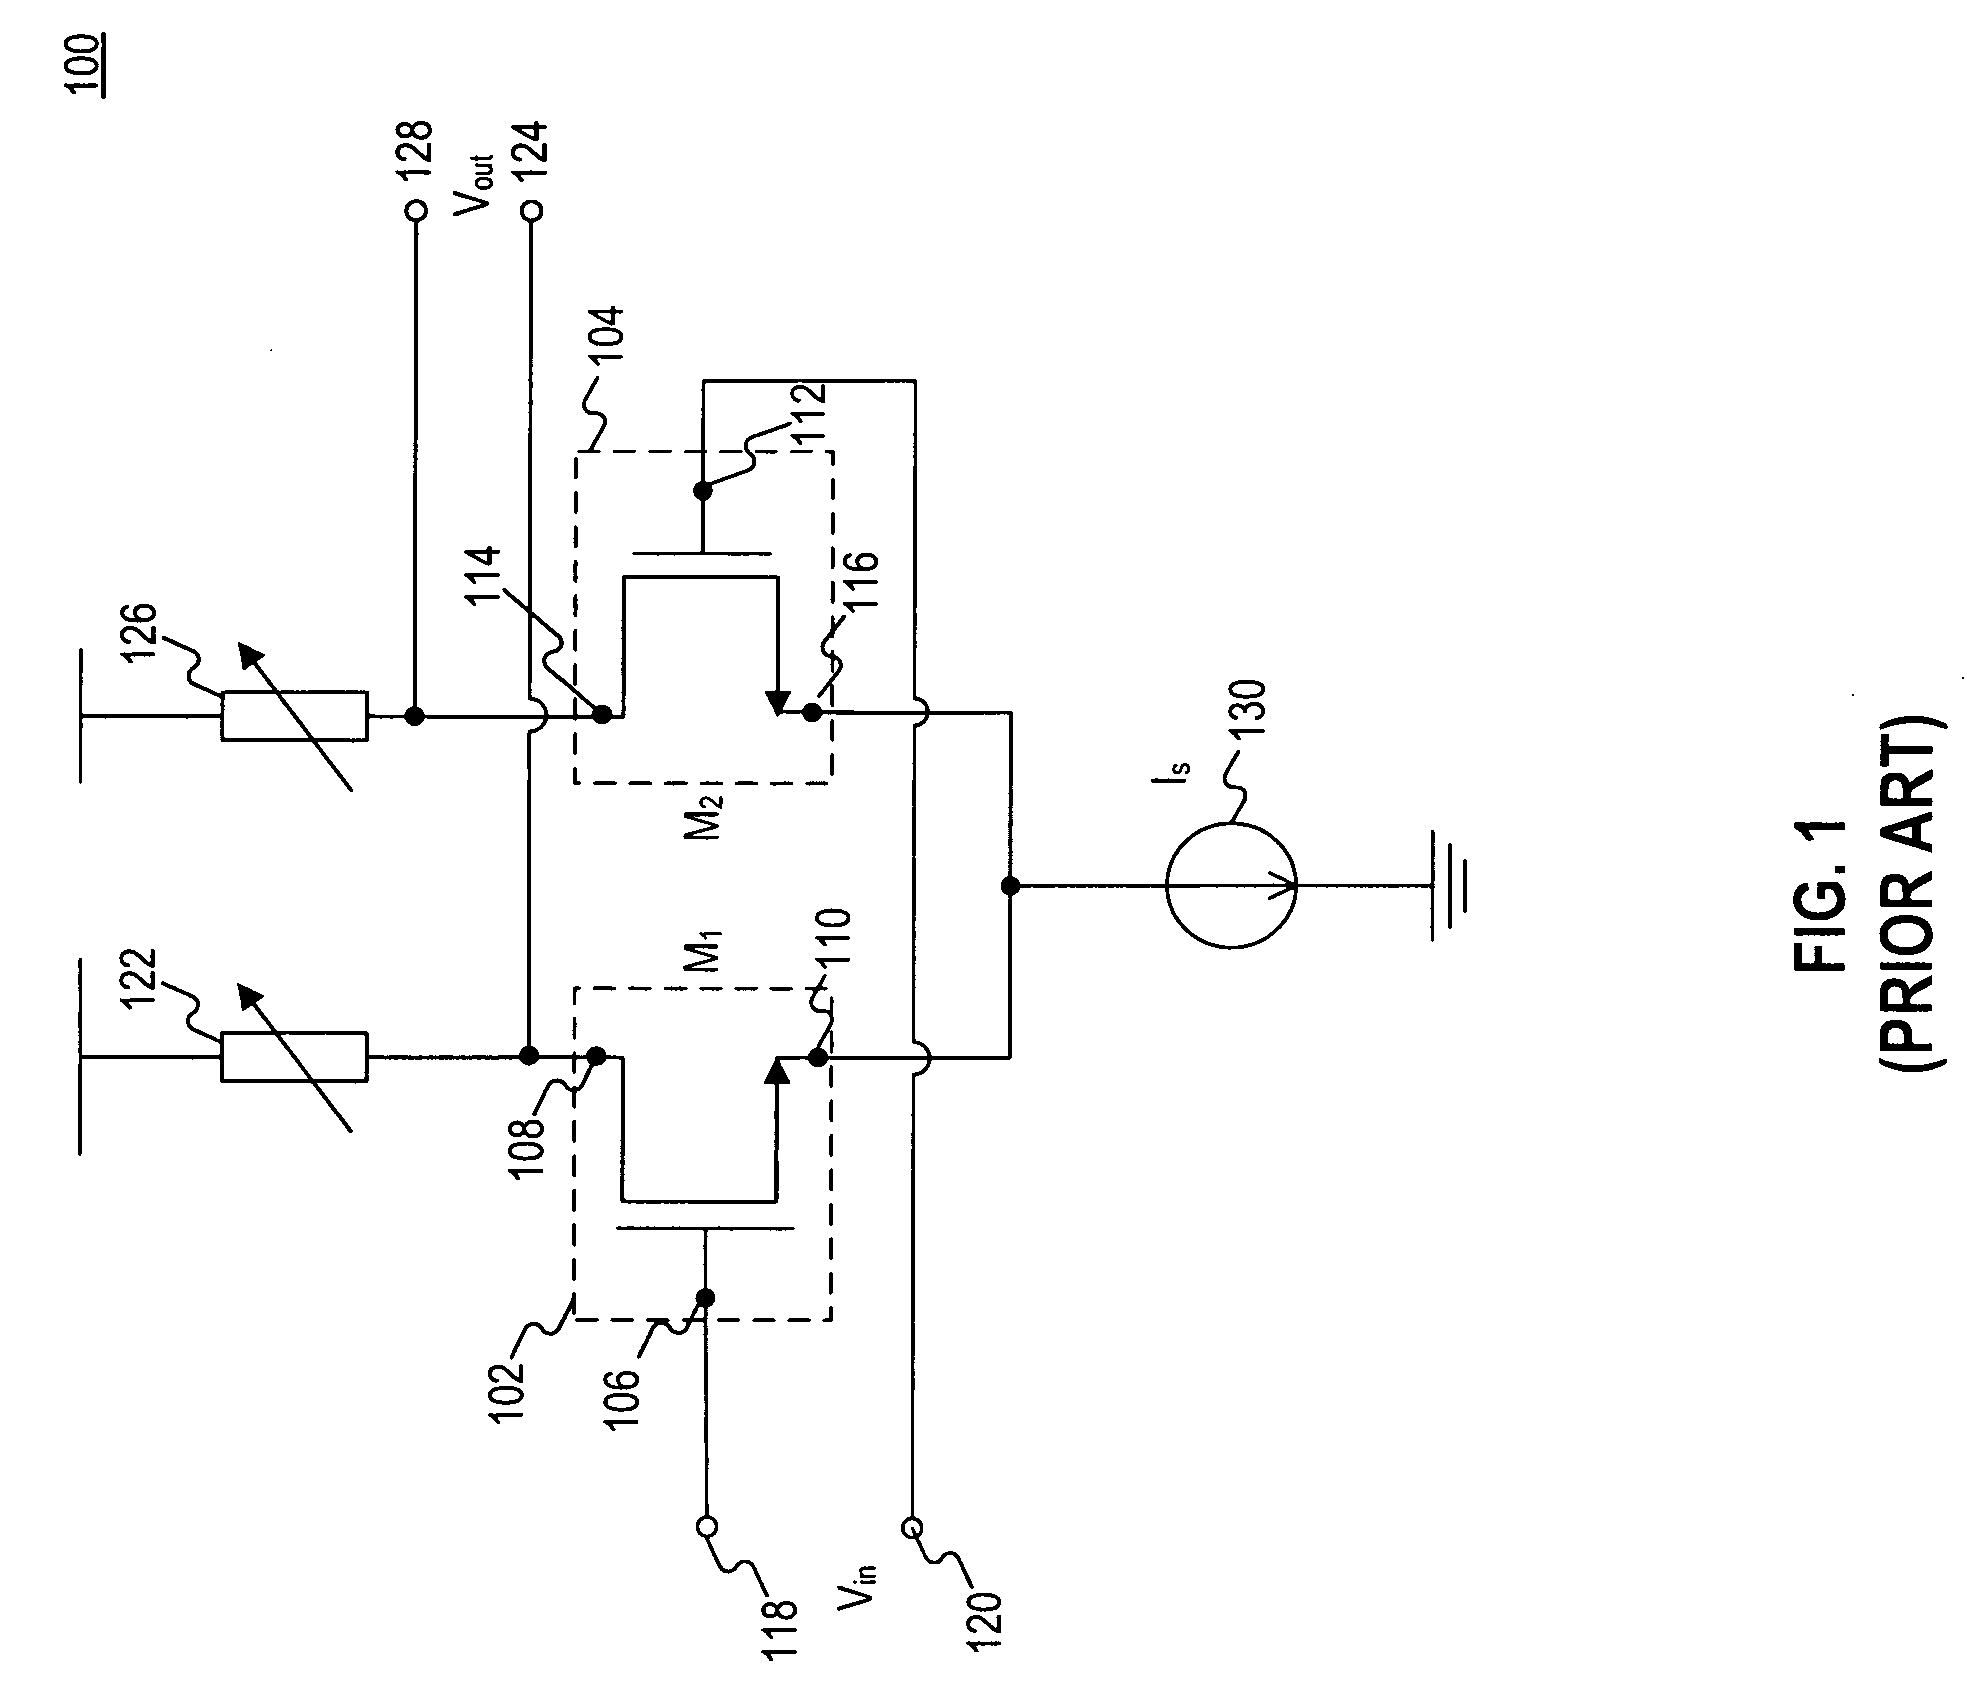 Variable gain amplifier including series-coupled cascode amplifiers